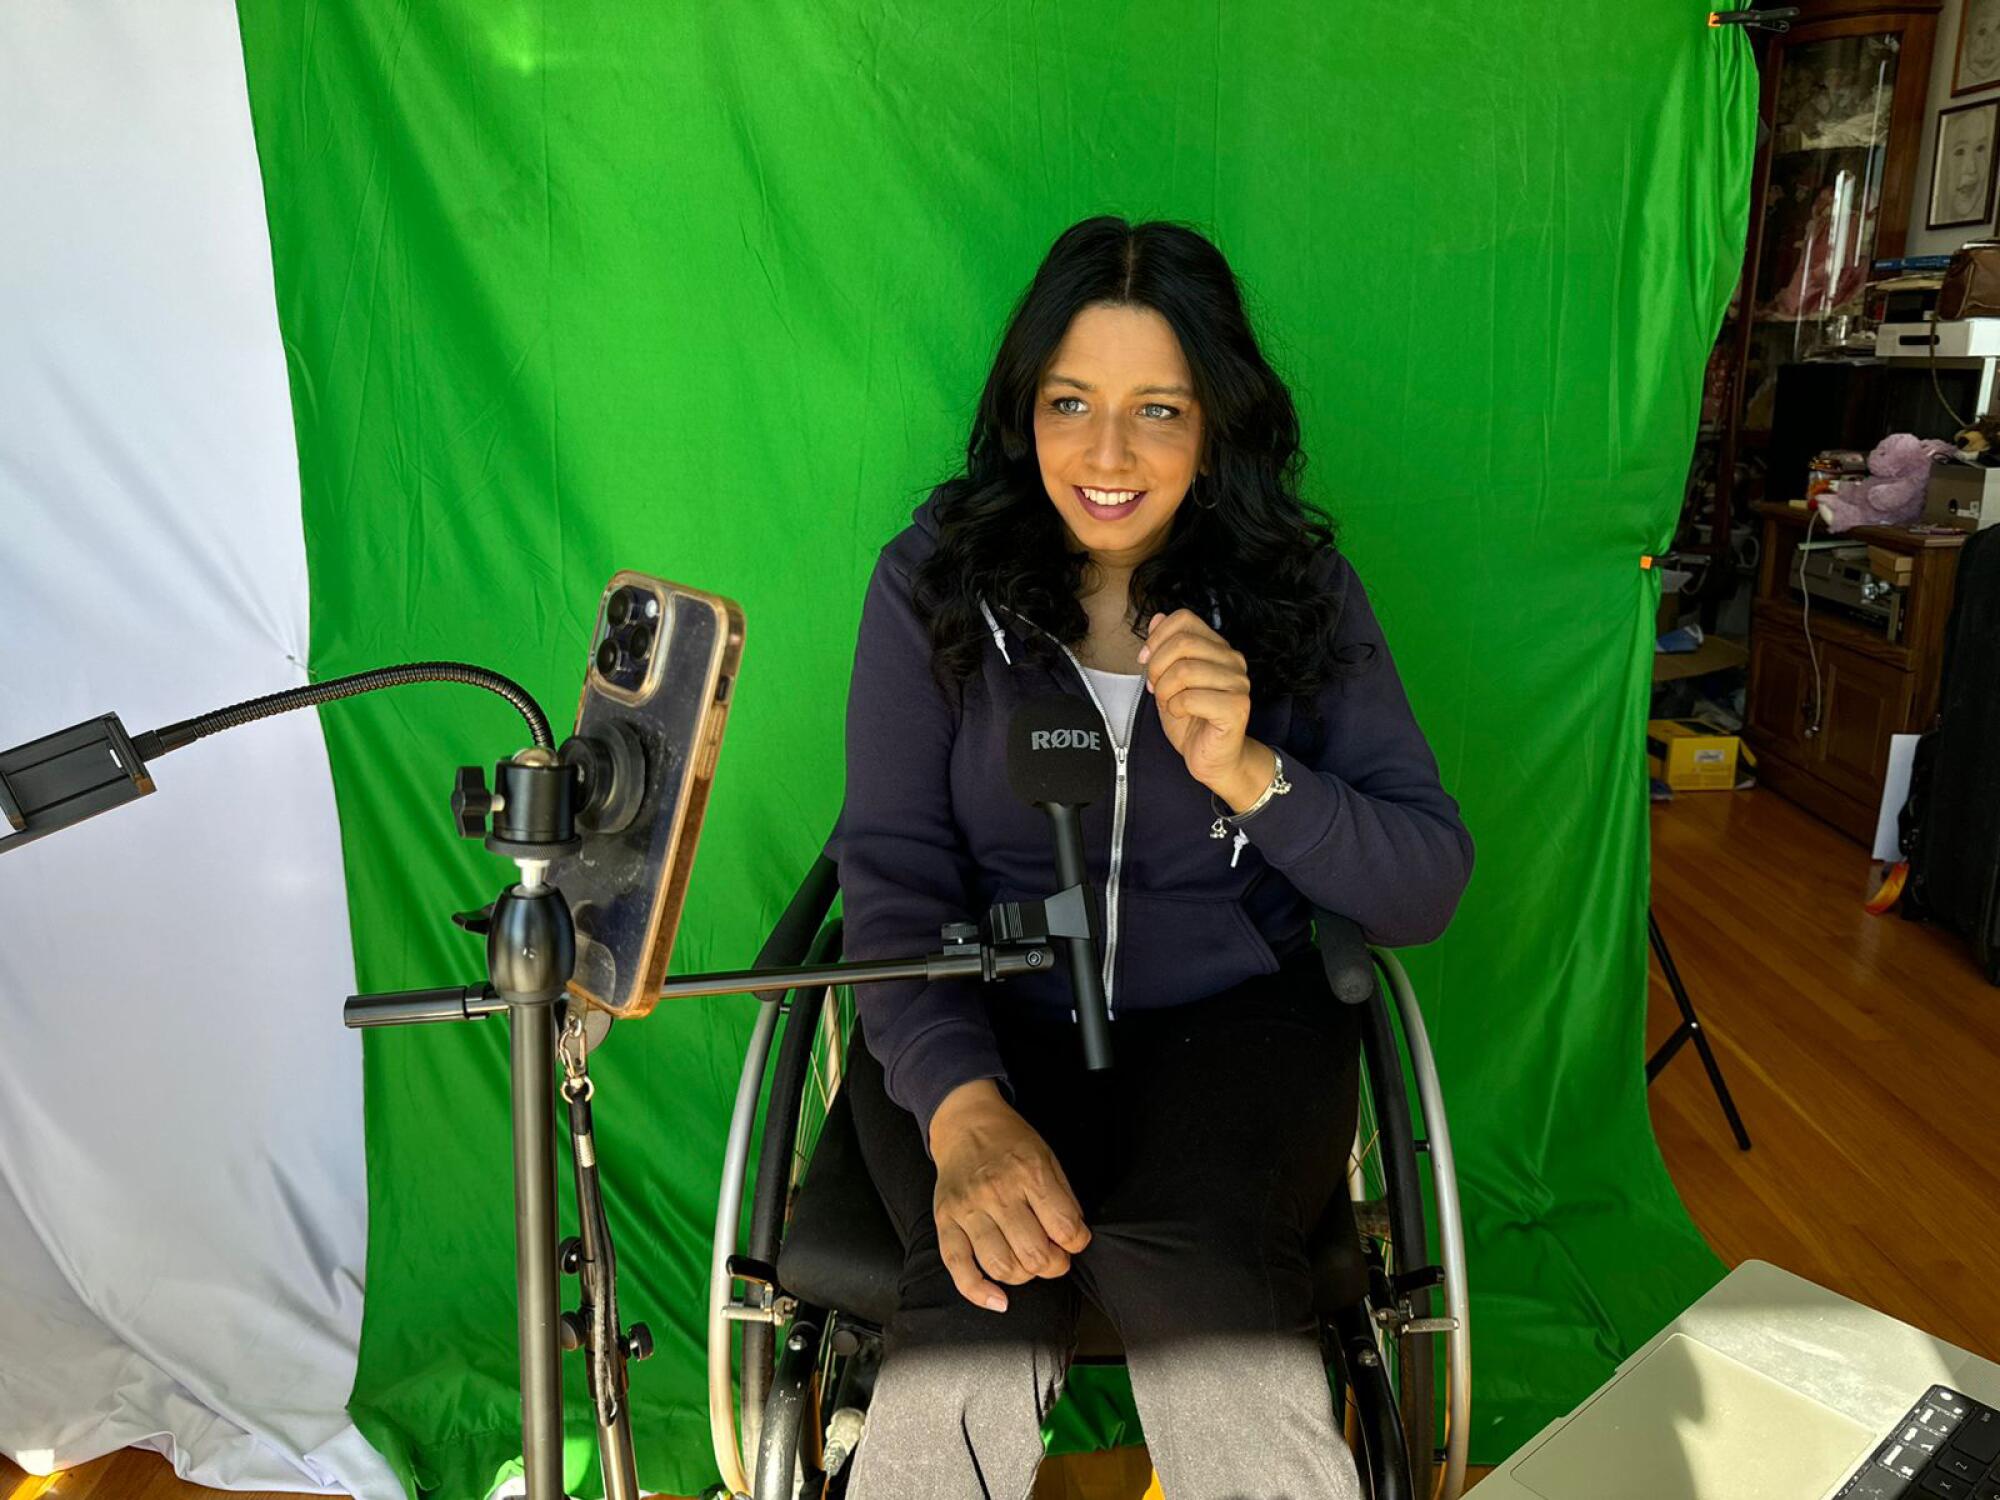 A woman in dark clothes, seated in a wheelchair against a green background, records herself on her cellphone